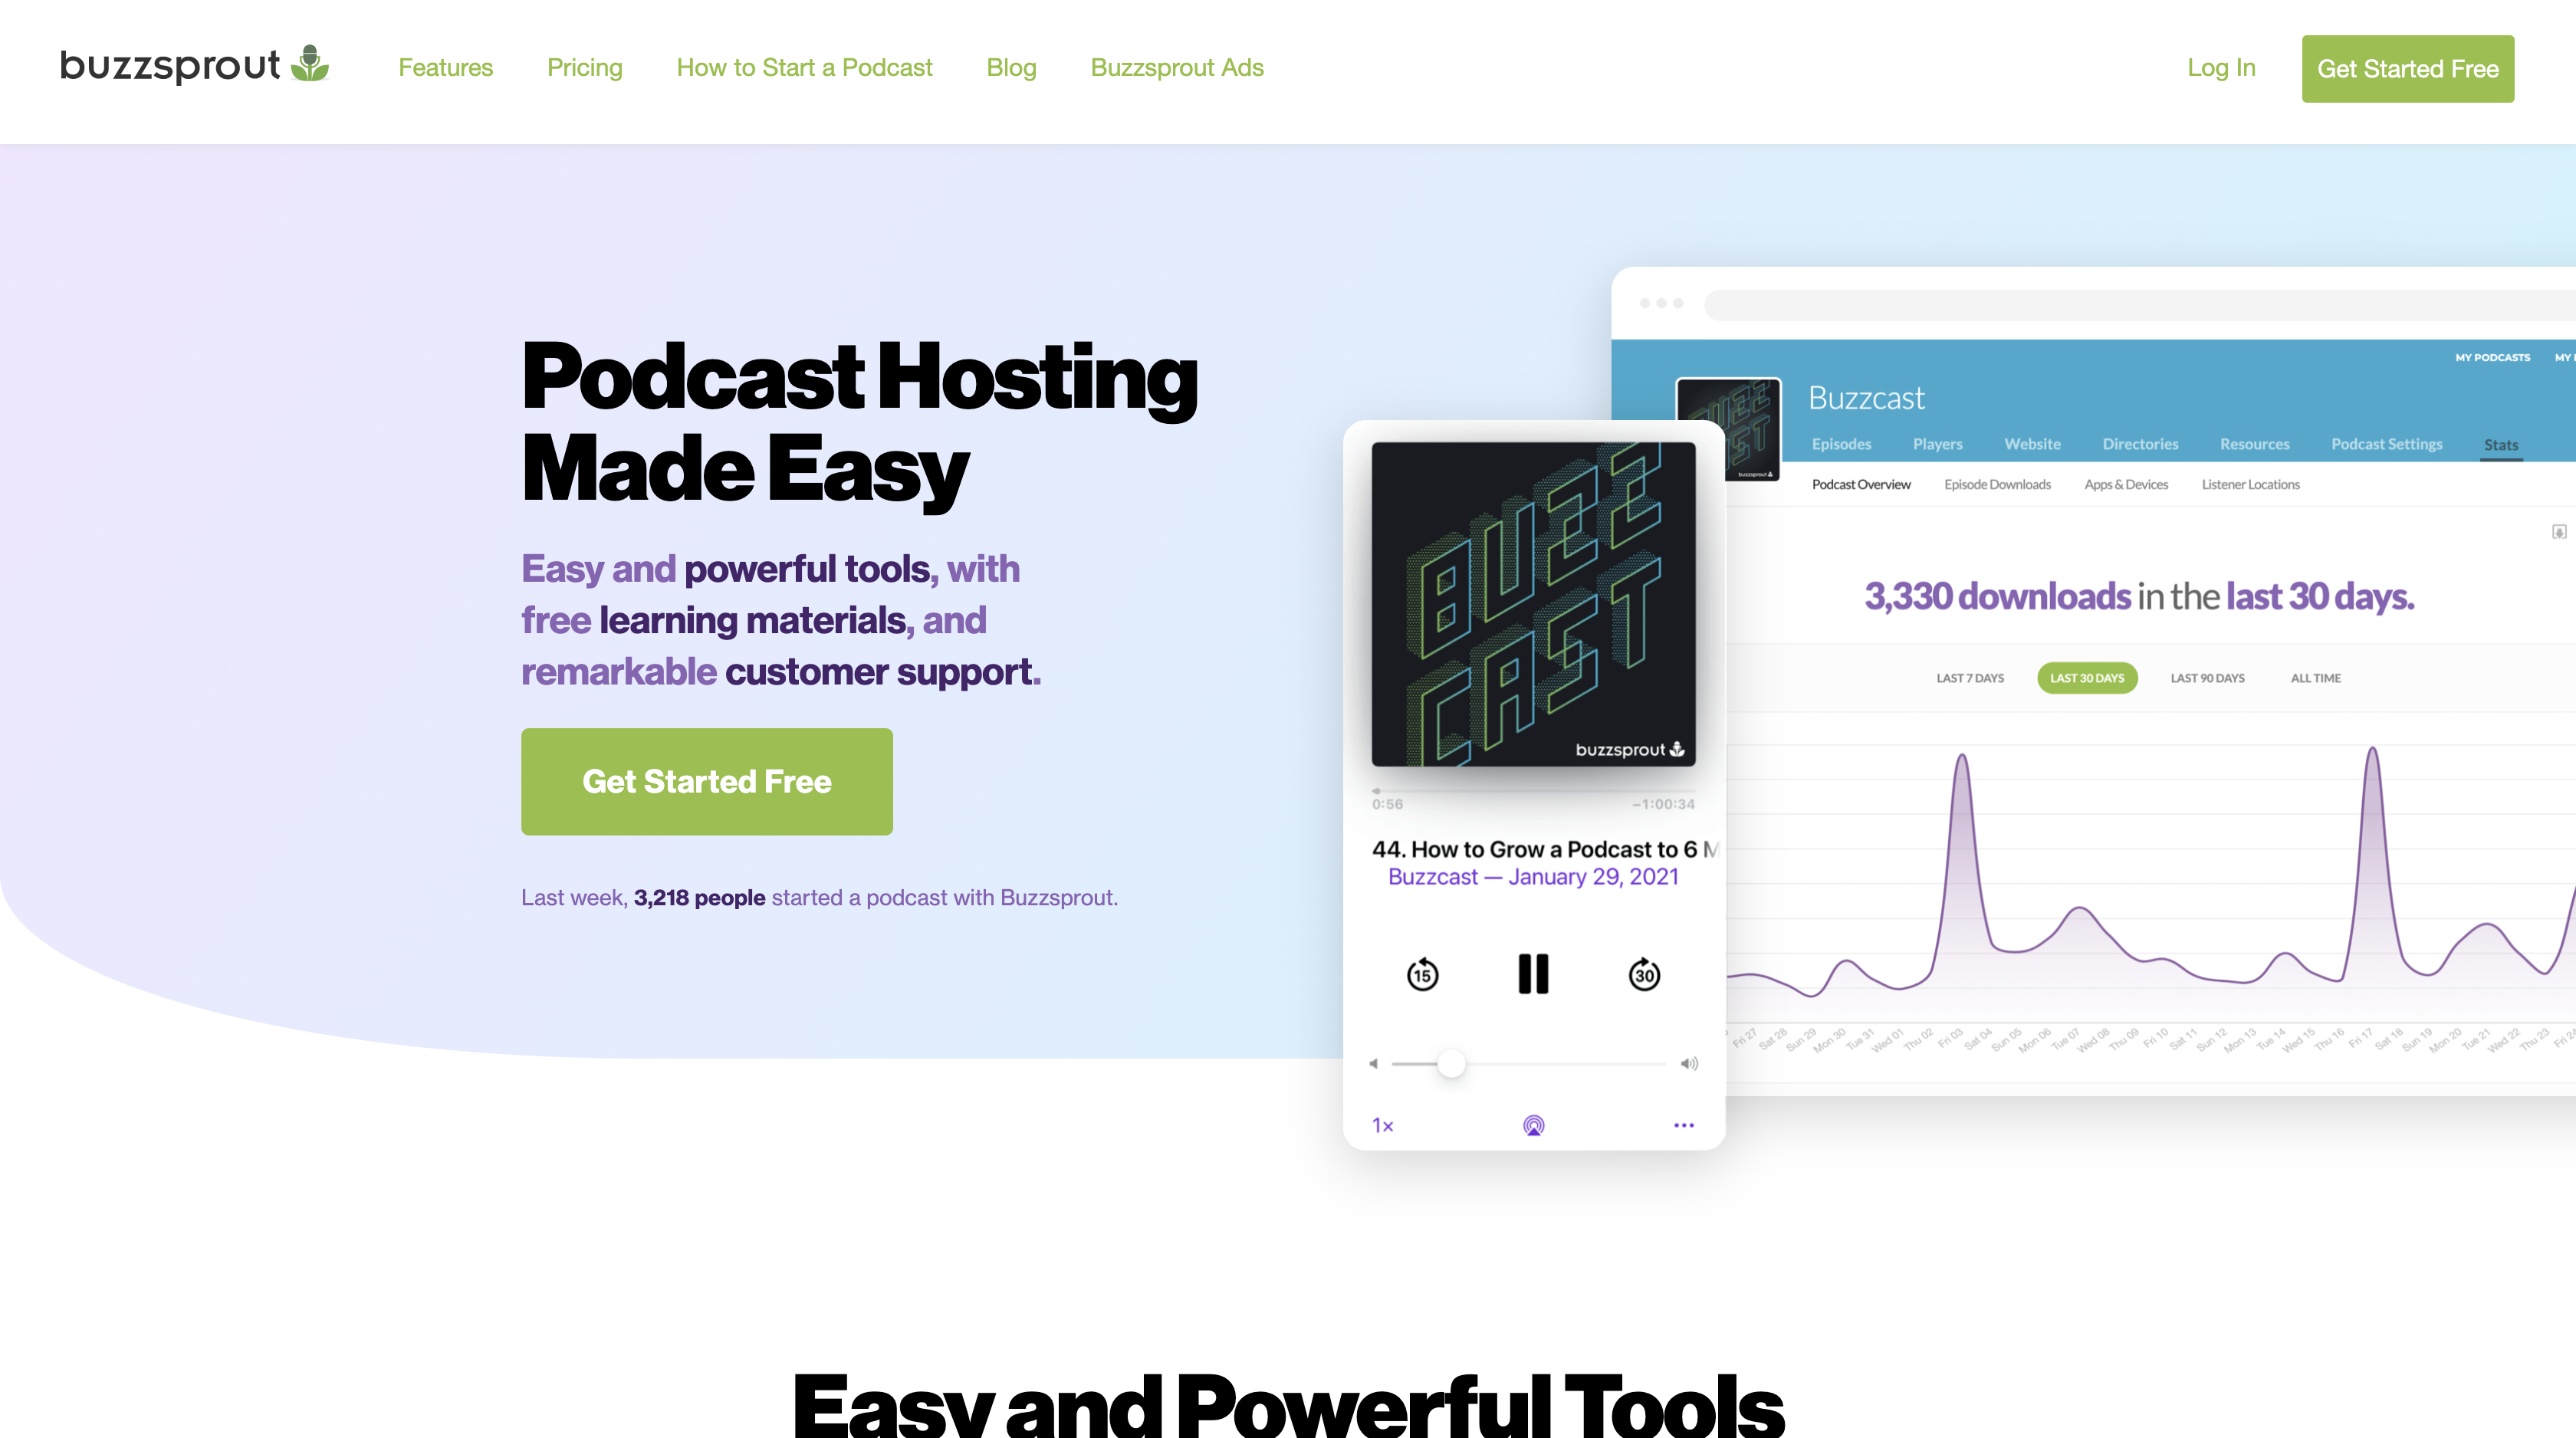 Platforms like Buzzsprout make podcast set up easy. It my opinion Buzzsprout is the best podcast hosting available, and they have their own podcast about starting podcasts!